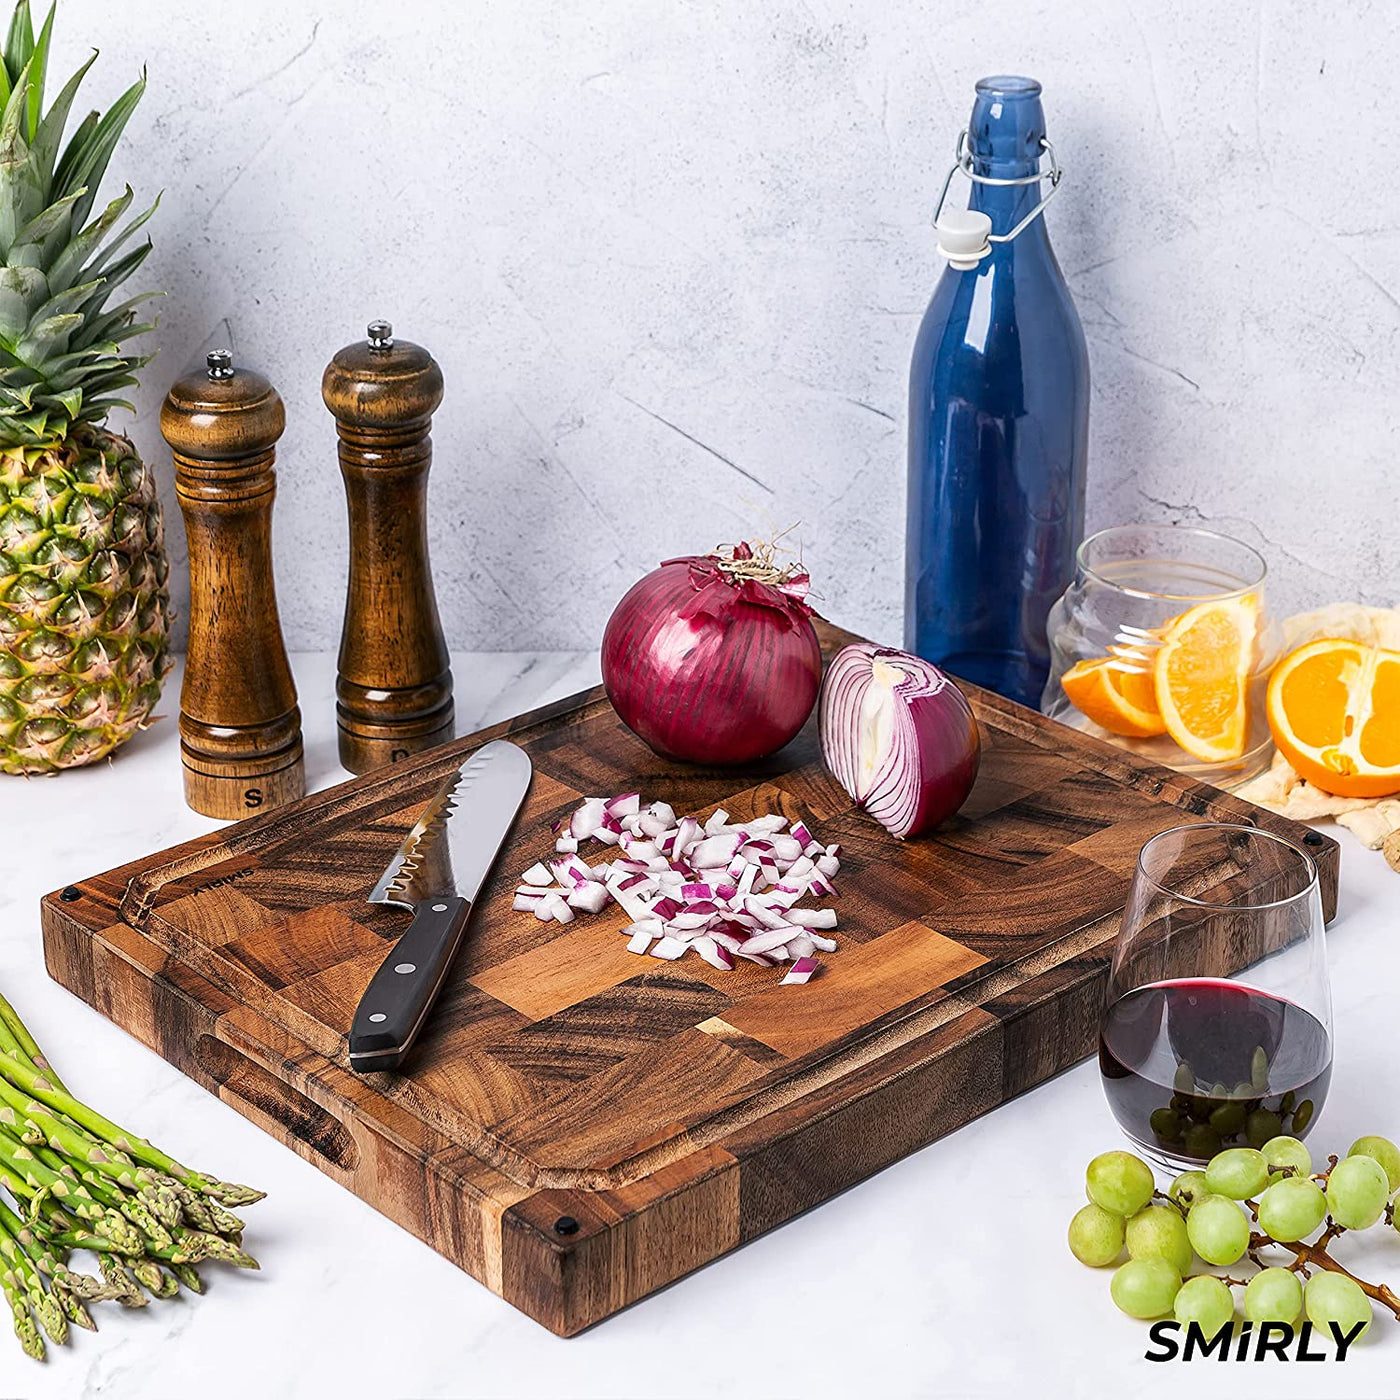 Smirly Bamboo Cutting Board Set: Wood Cutting Boards for Kitchen